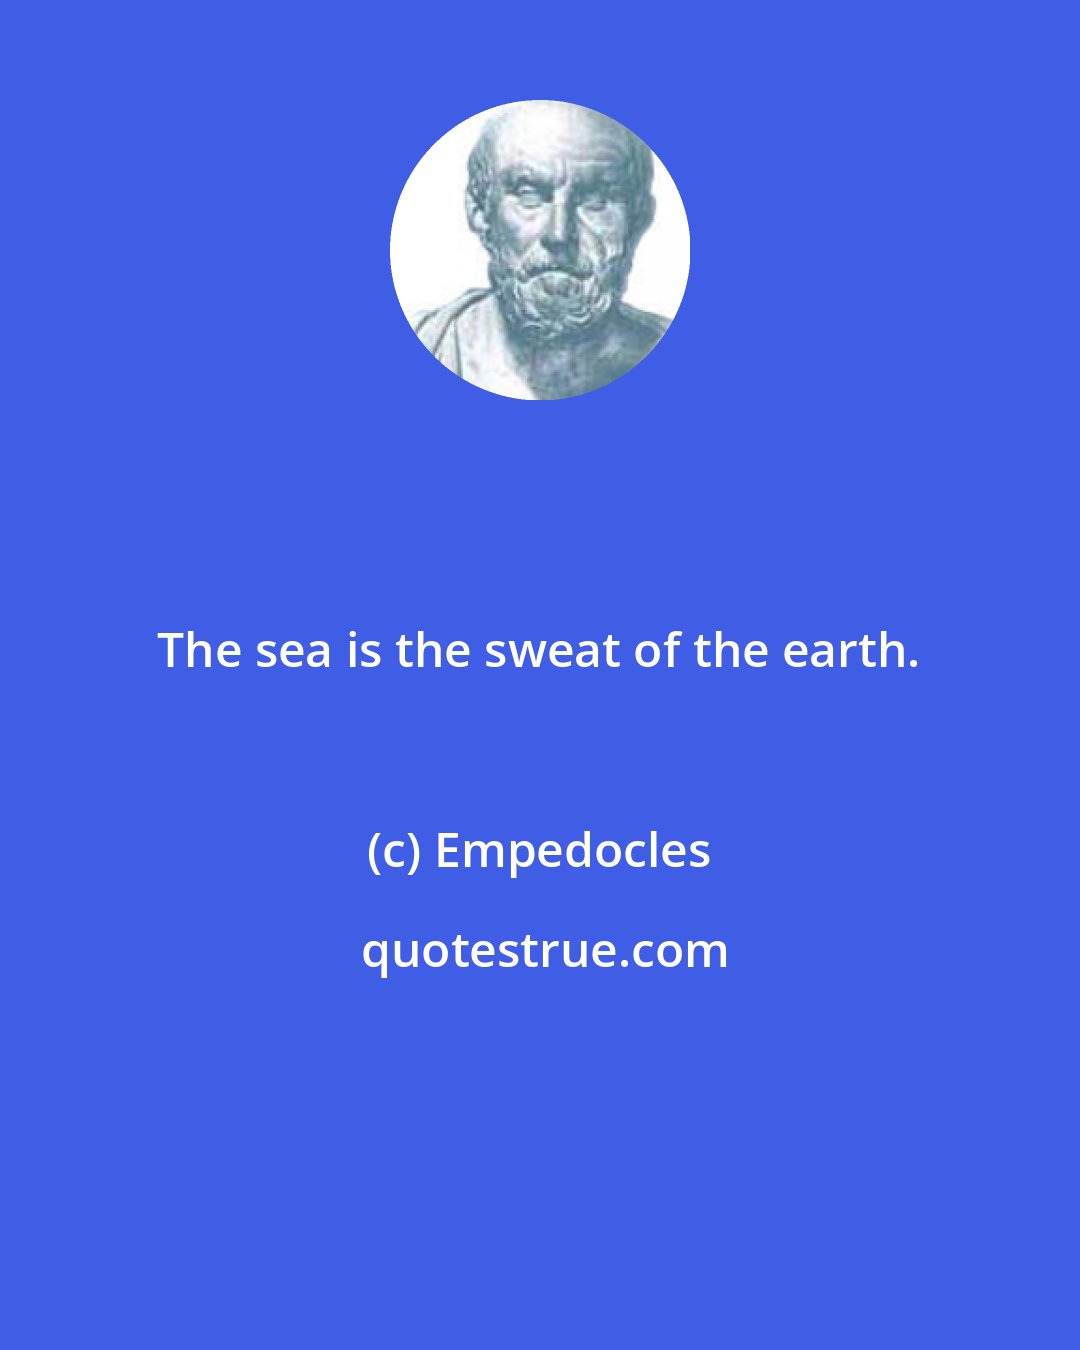 Empedocles: The sea is the sweat of the earth.